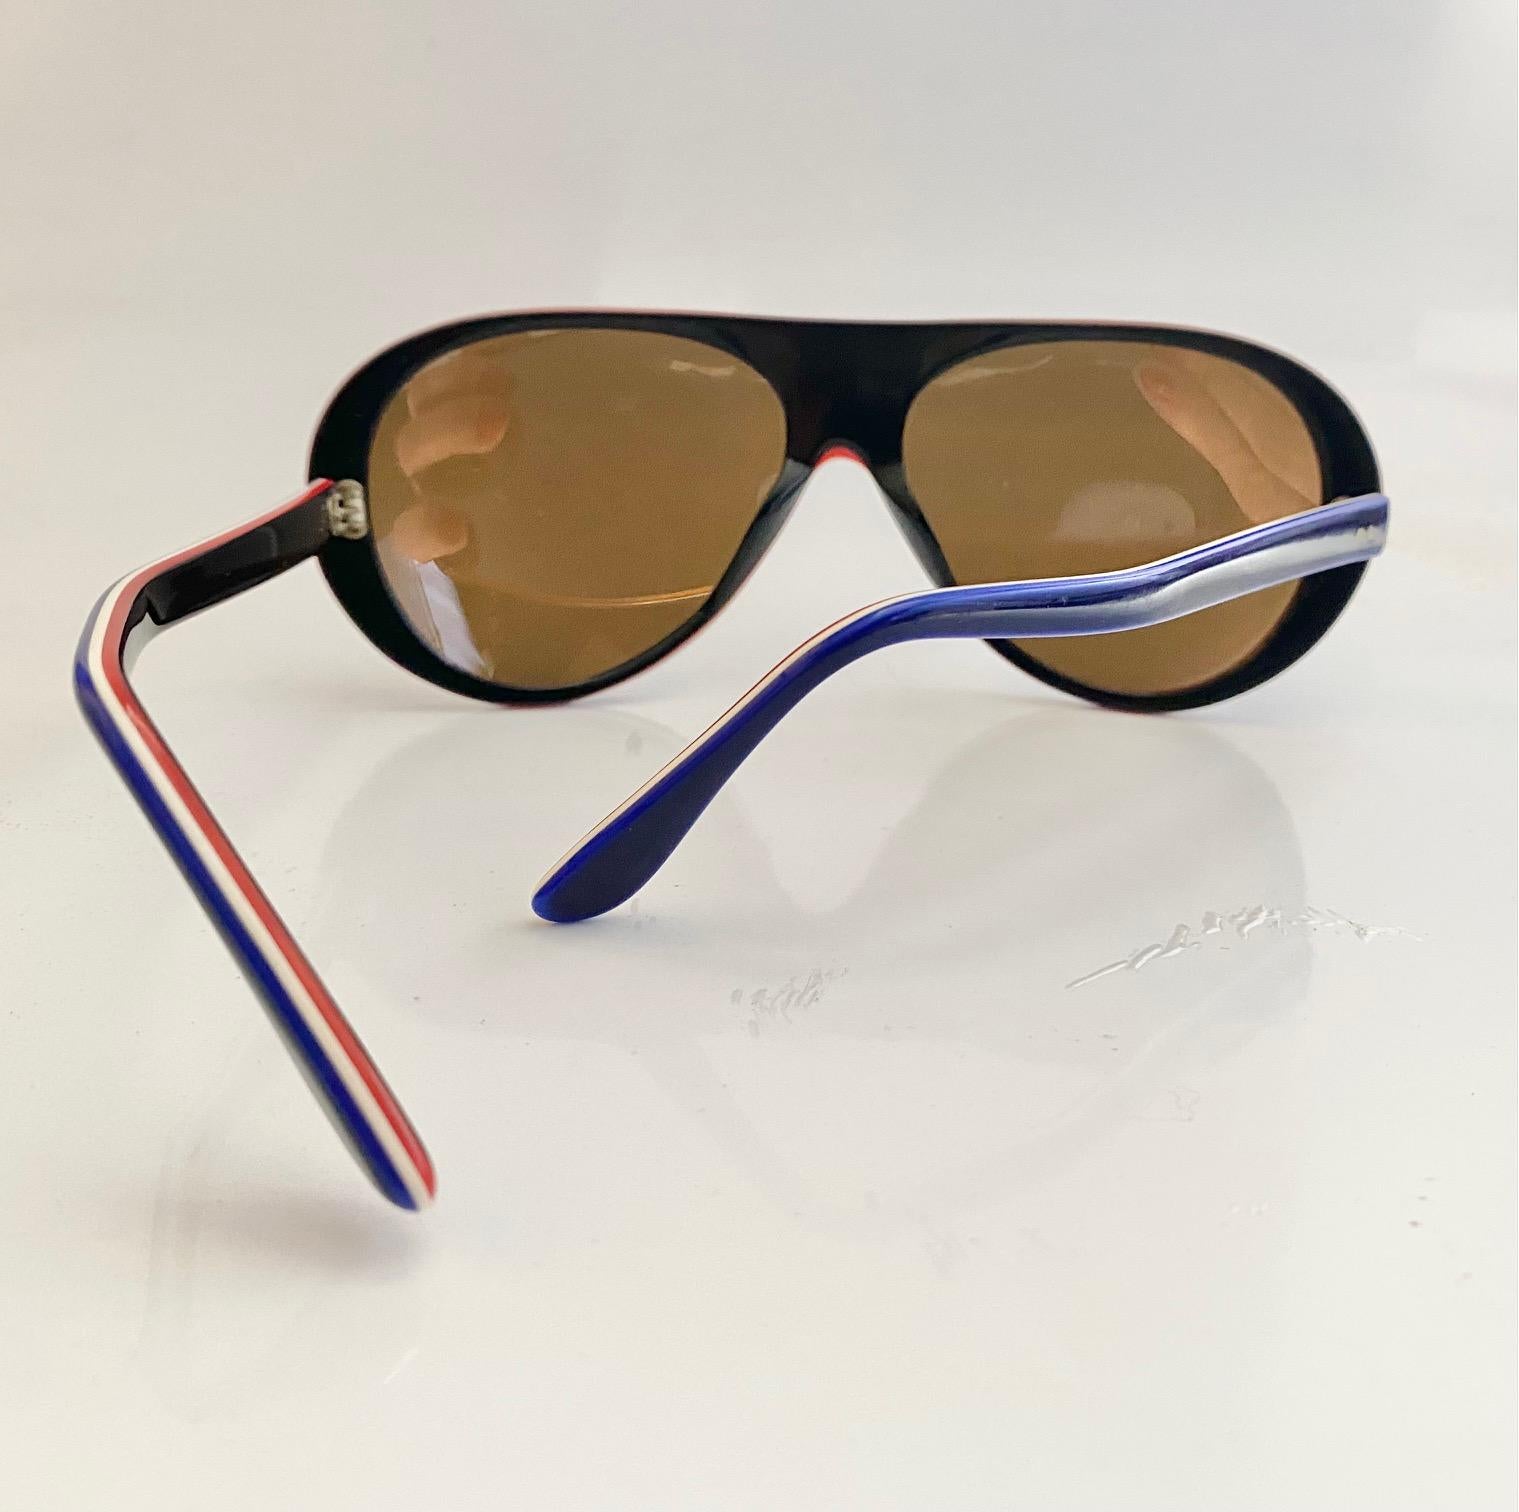 The 1980s Rossignol Mirrored Ski/Beach Blue red White (French flag colors)  Sunglasses boast a bright blue frame, mirrored lenses, and French flag-colored temples, all crafted in France.

Condition: late 70s, early 80s, vintage,